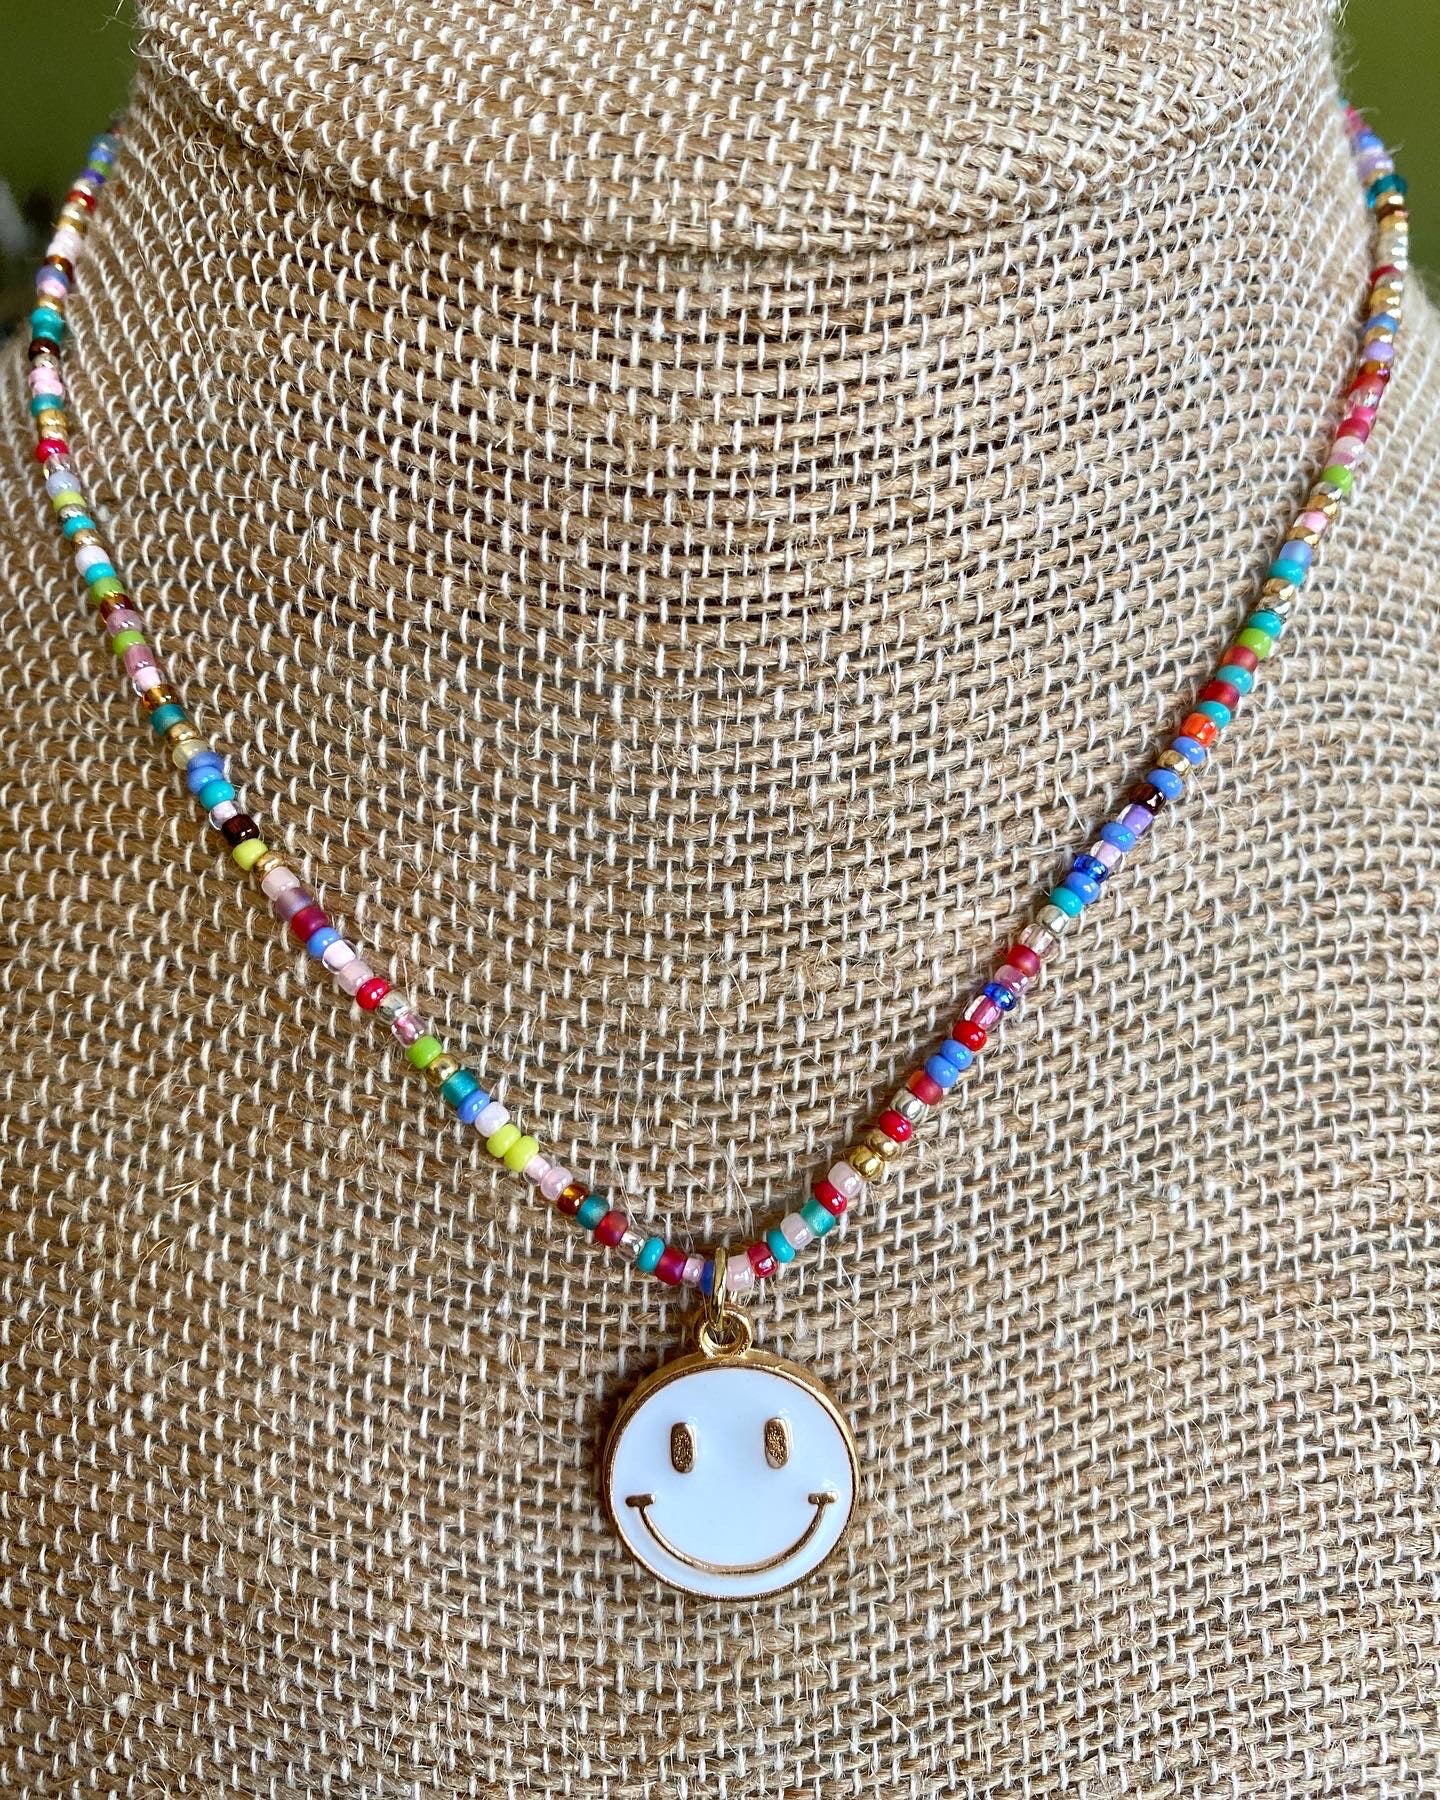 Tiny seed beads with smiley face necklace